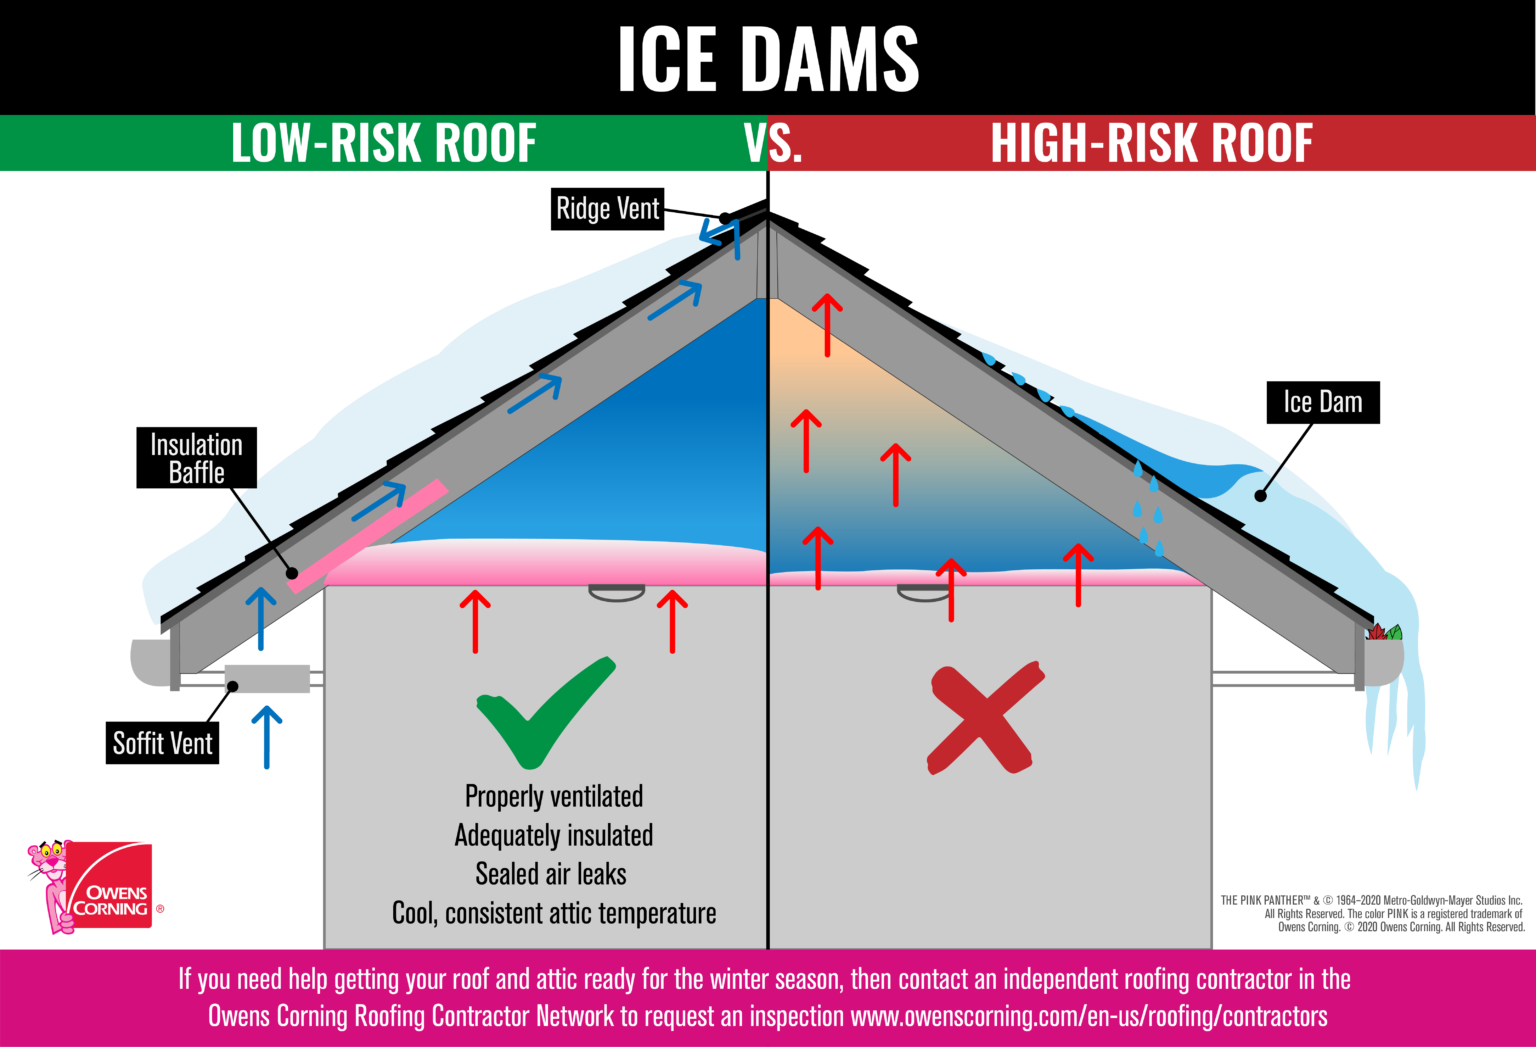 Illustration comparing a low-risk vs high-risk roofs for ice damming